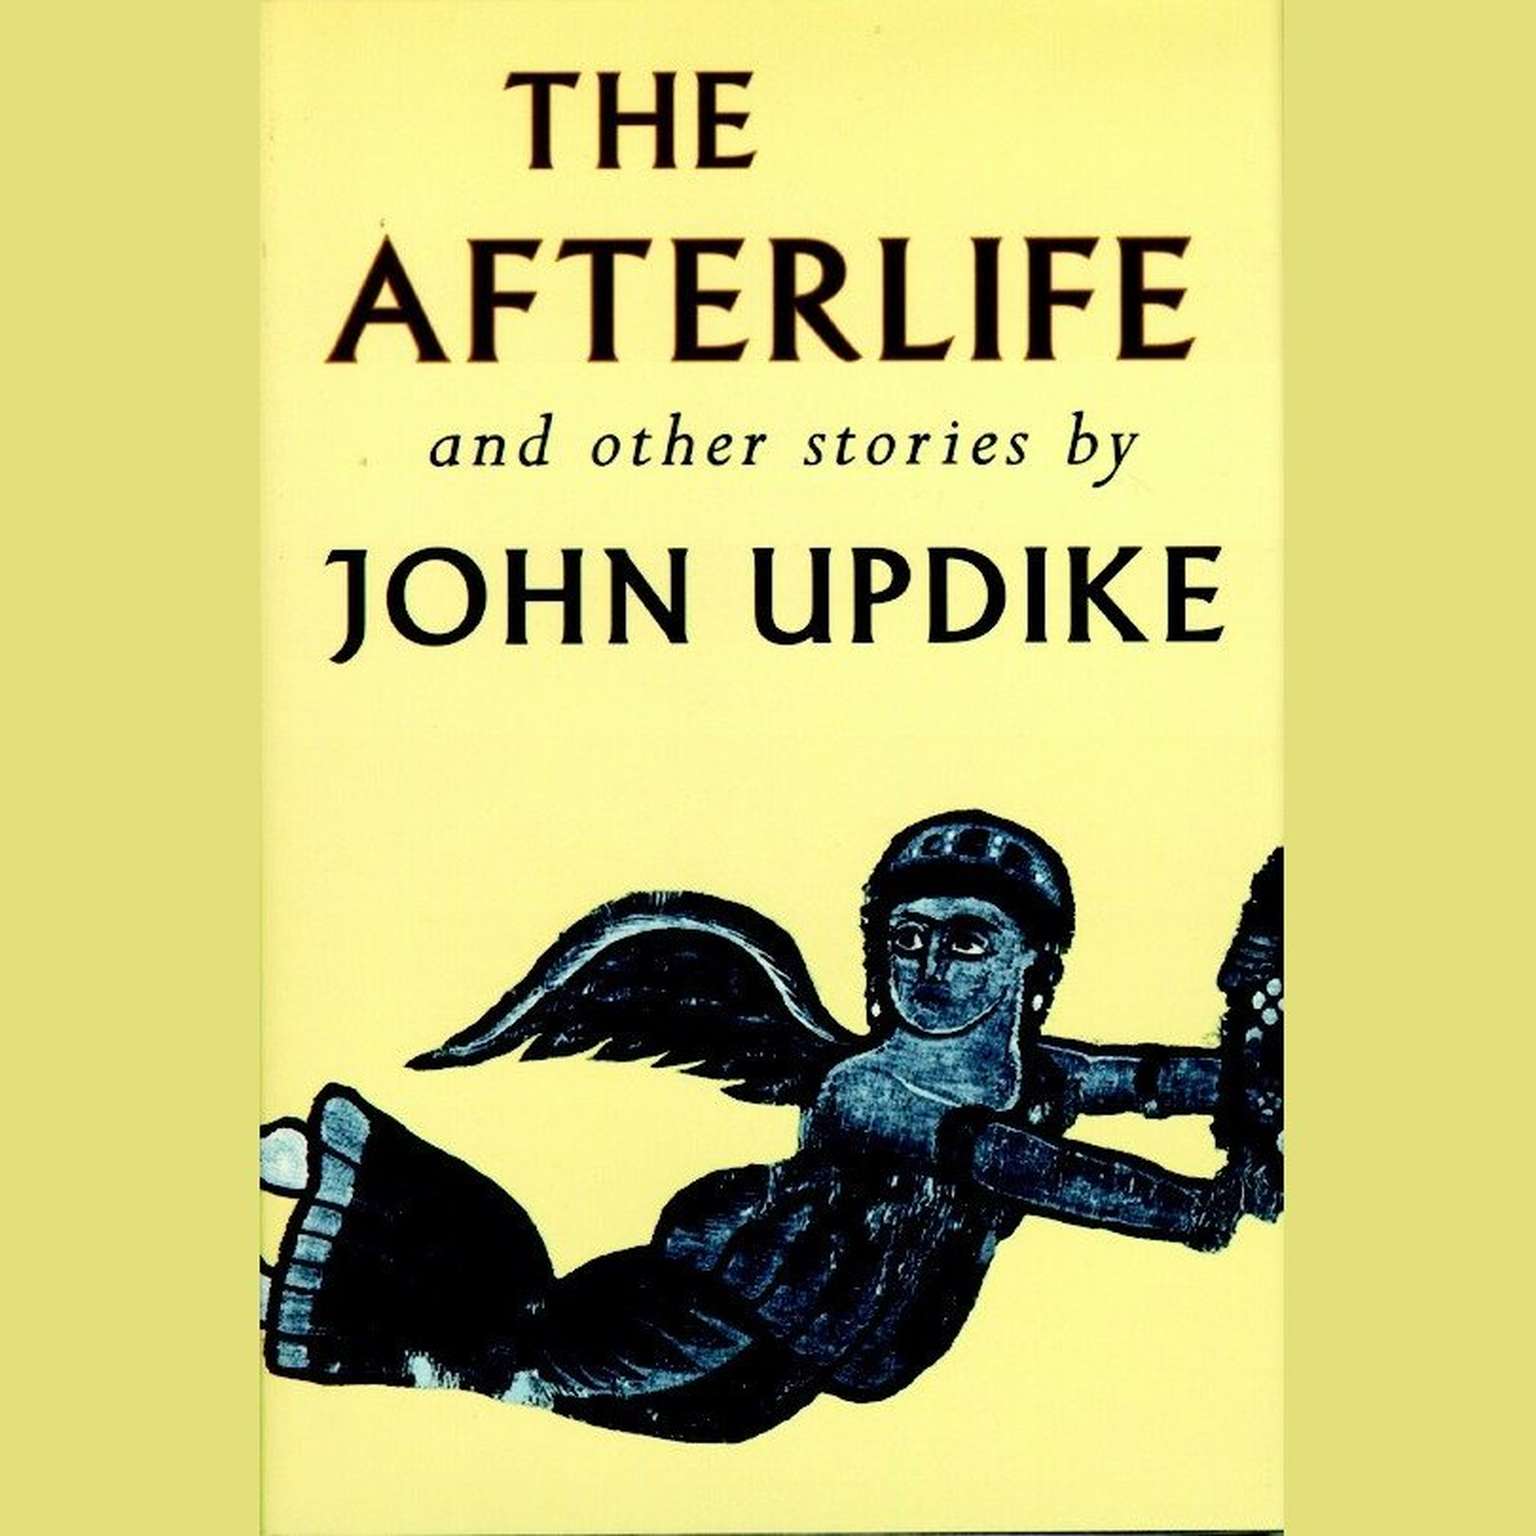 The Afterlife and Other Stories (Abridged): Unabridged Selections: The Man Who Became a Soprano, The Afterlife, The Other Side of the Street, Farrells Caddie, Grandparenting Audiobook, by John Updike